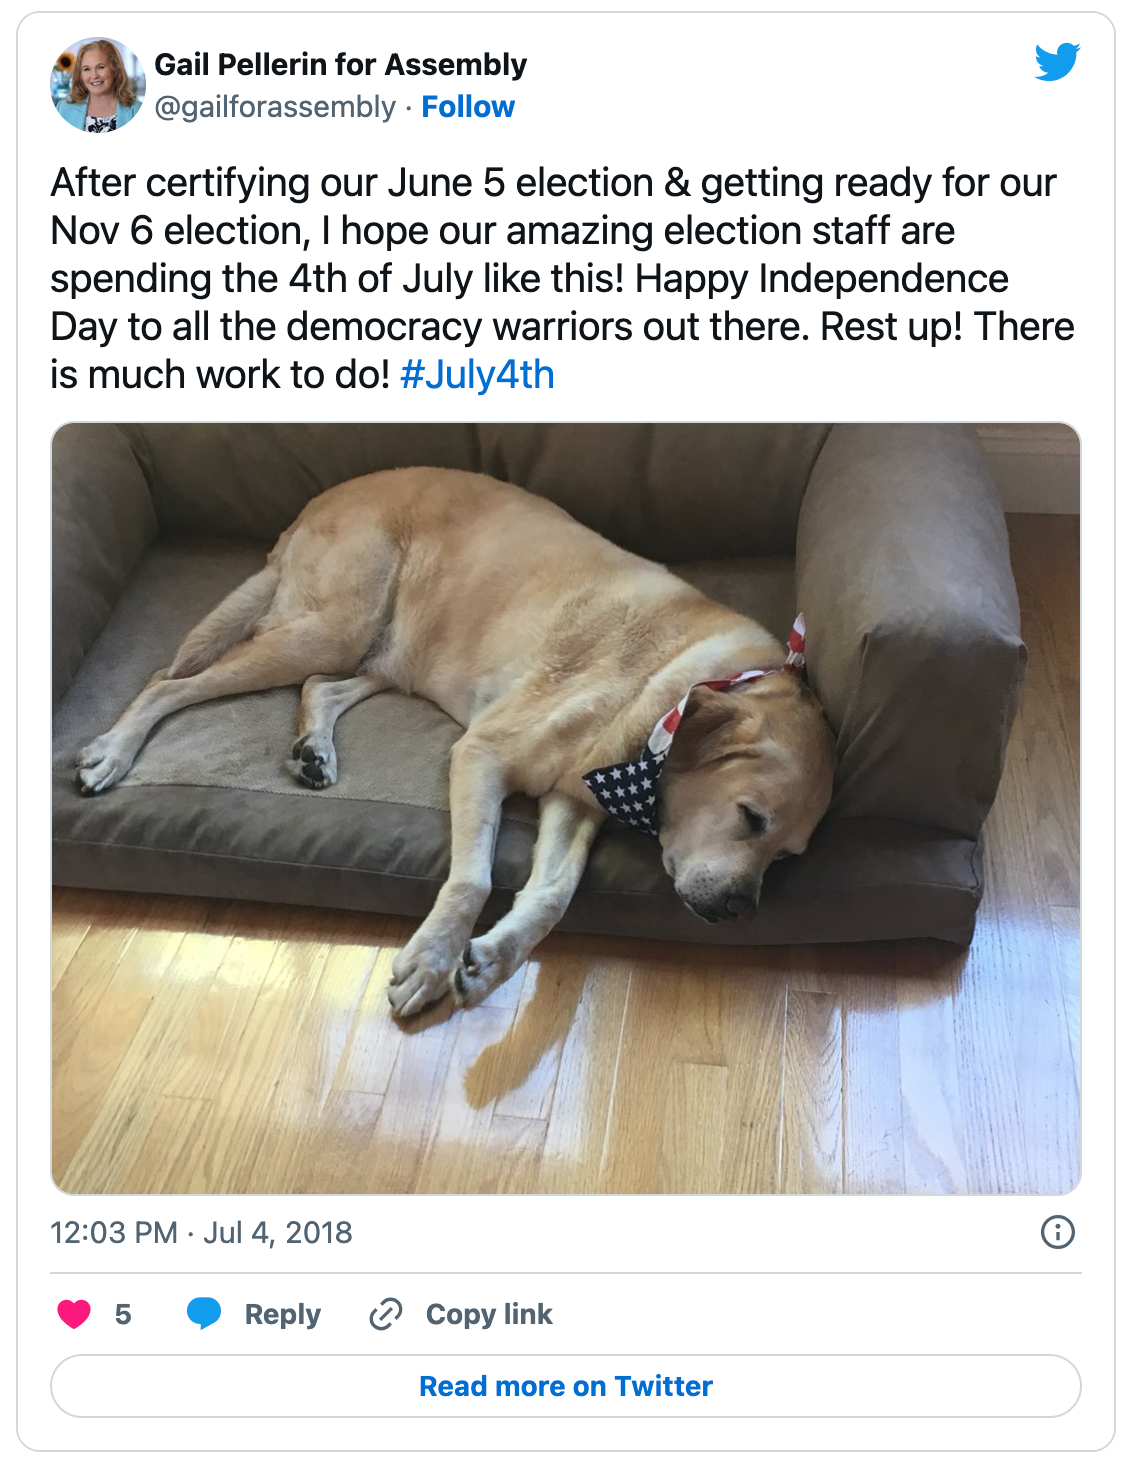 A tweet with a picture of a dog wearing an American Flag bandana sleeping. The tweet reads, "I hope our amazing election staff are spending the 4th of July like this!"